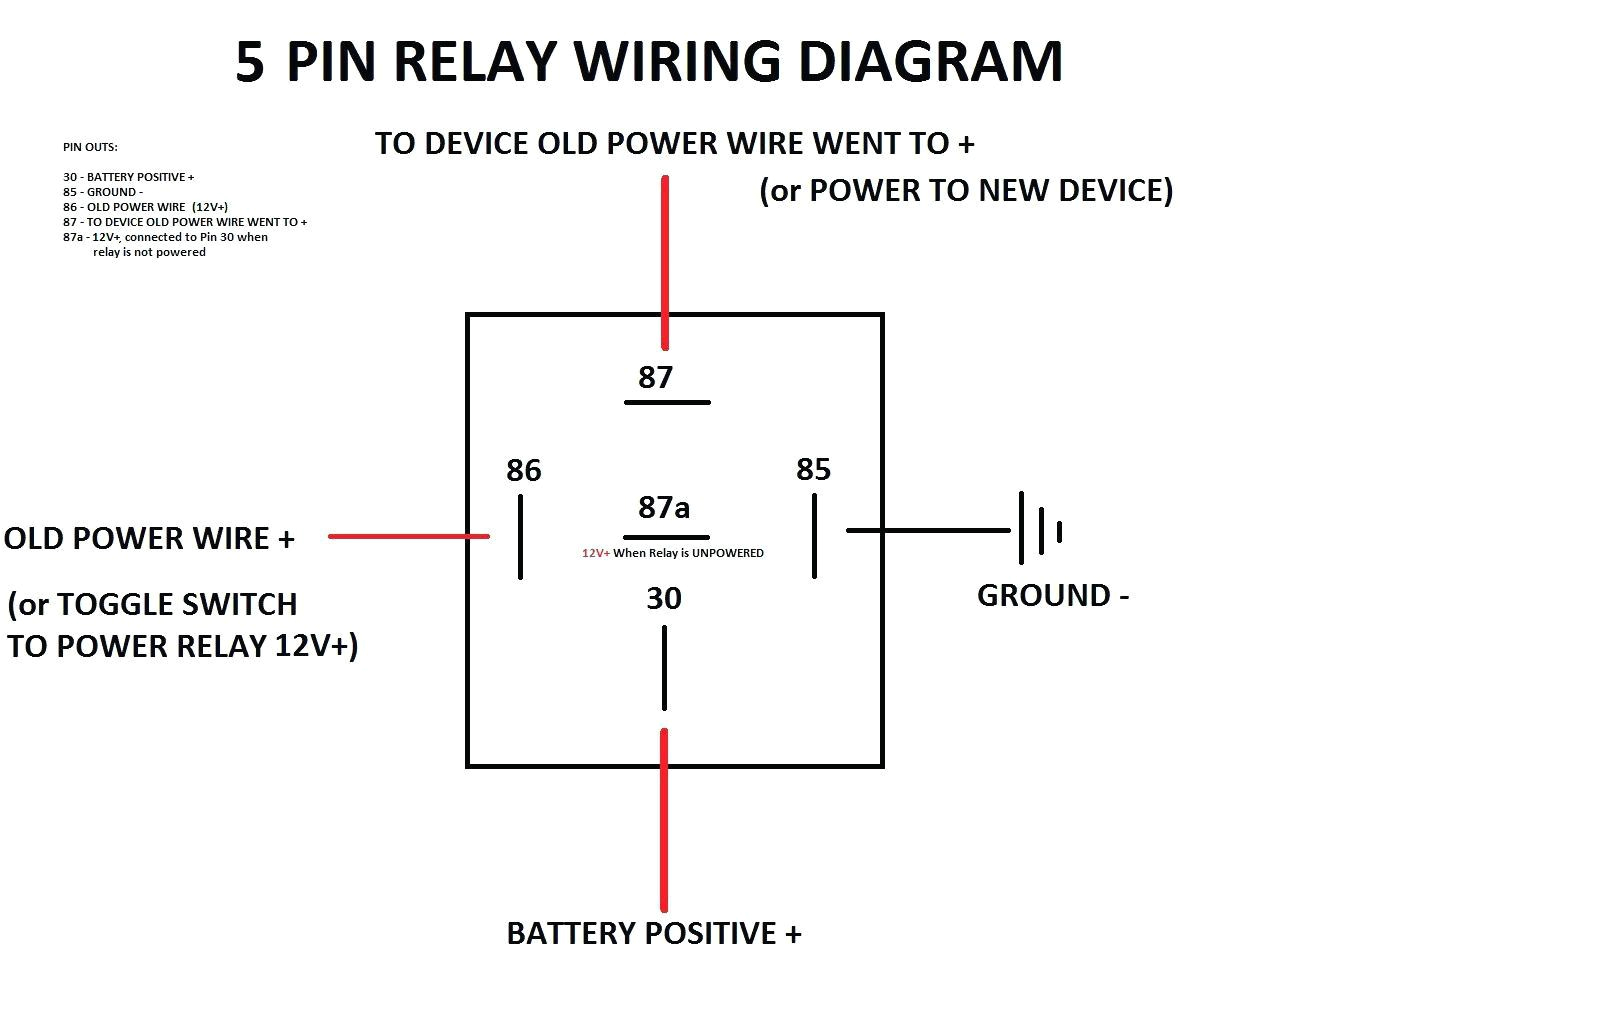 wiring diagram for automotive relay wiring diagram mega automotive wiring relays diagram wiring diagram paper dpst